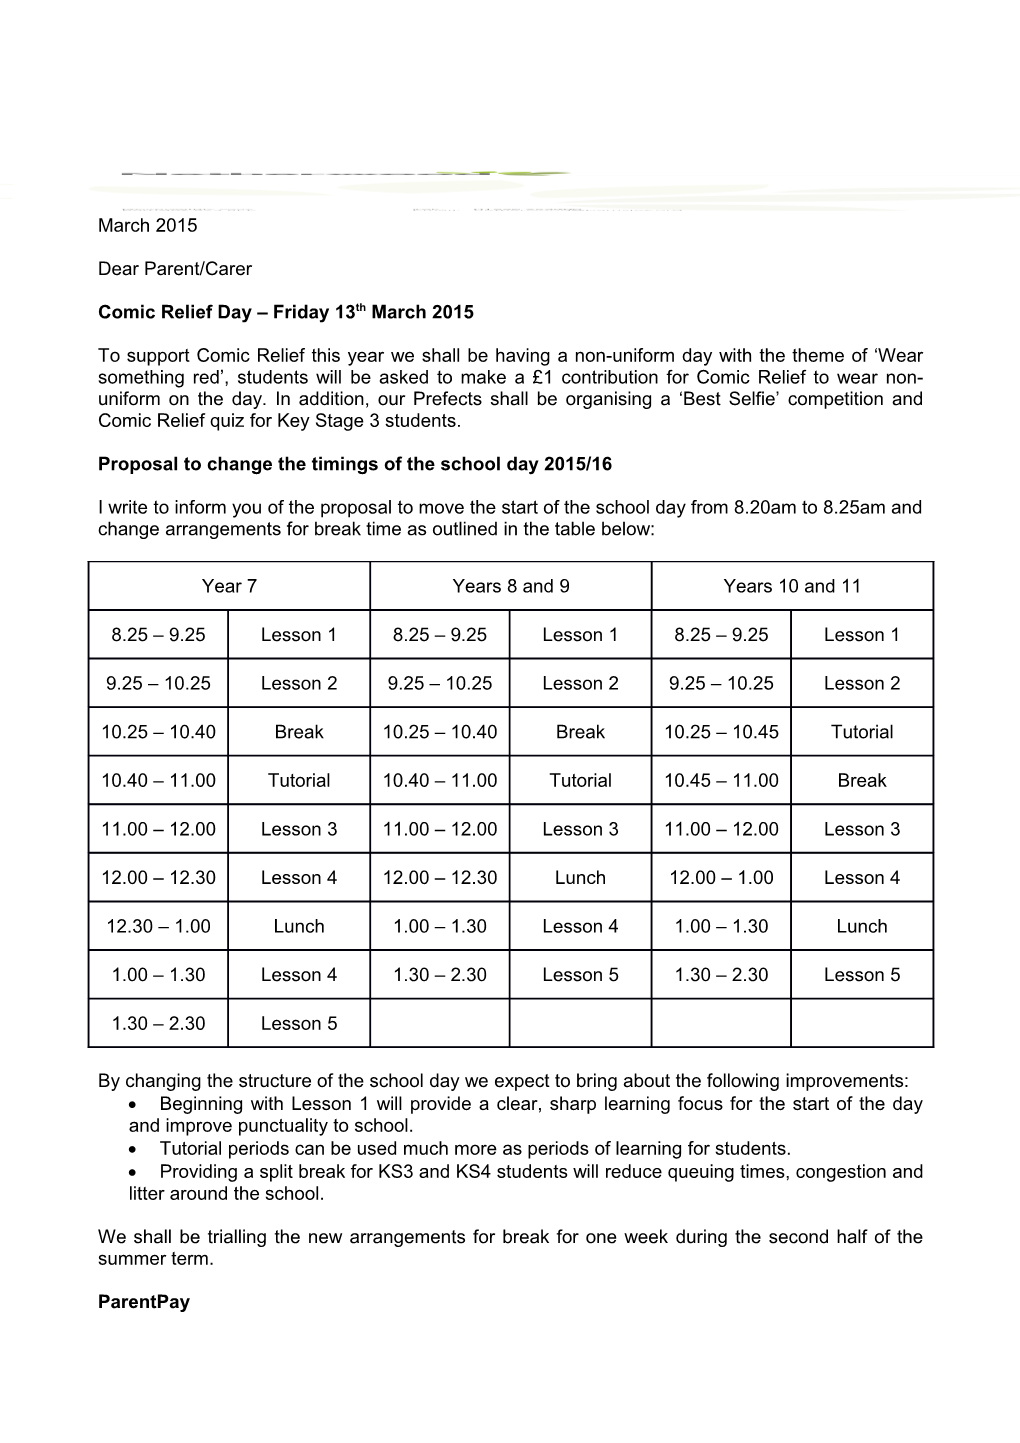 Proposal to Change the Timings of the School Day 2015/16